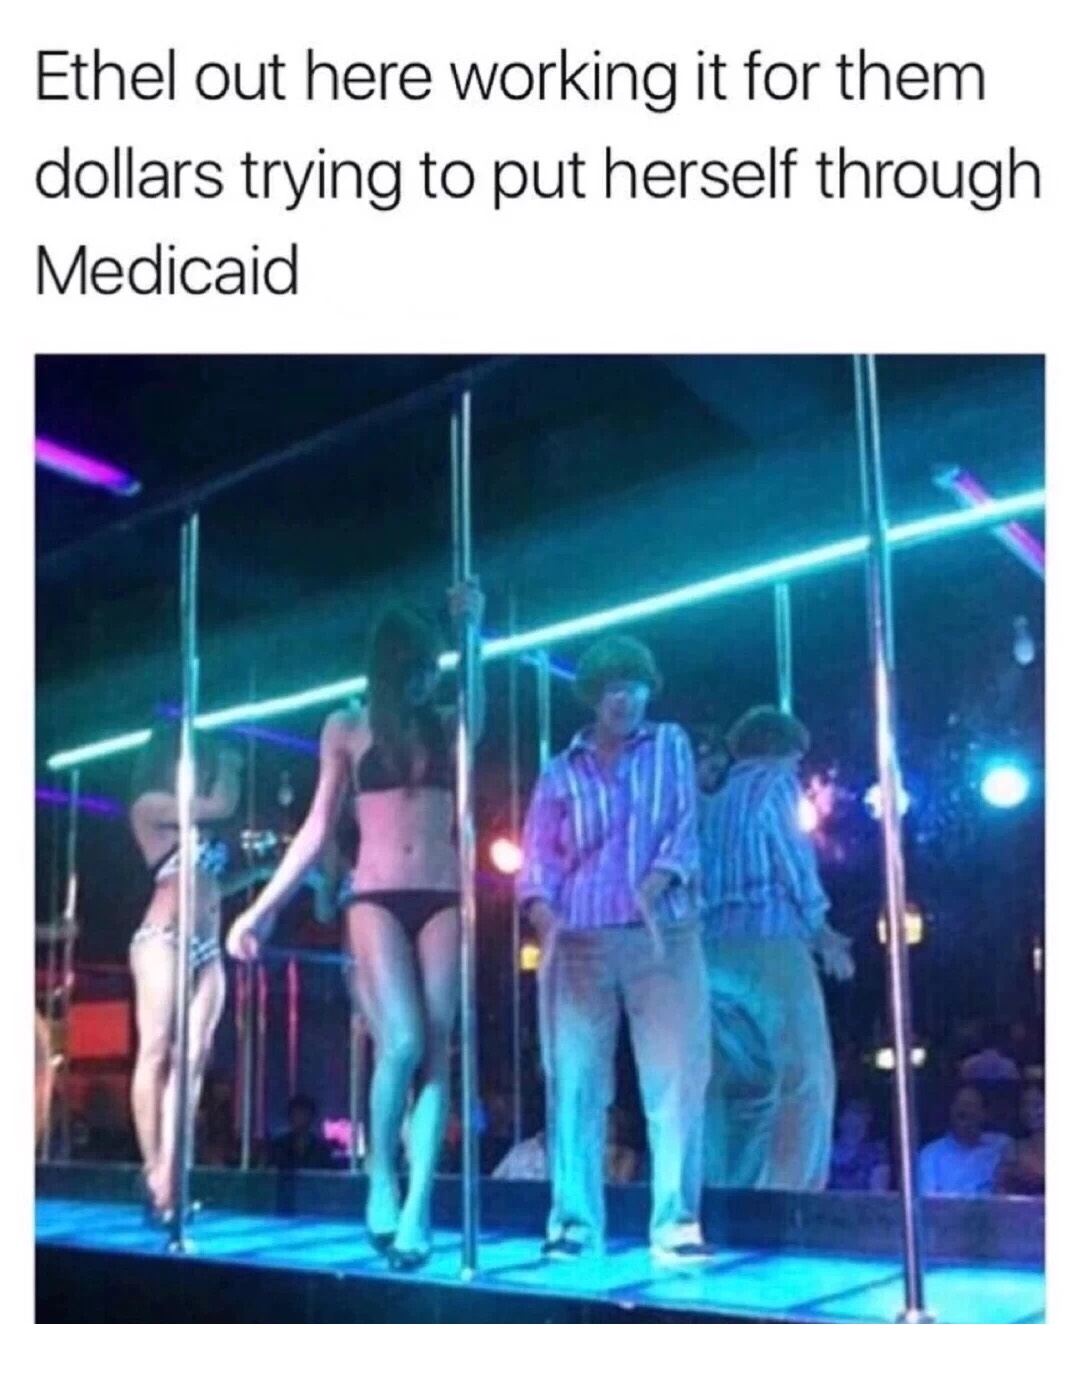 Funny picture of an old woman dancing on stage along side strippers with joking caption saying that Ethel is working for those dollars to make it through Medicaid.